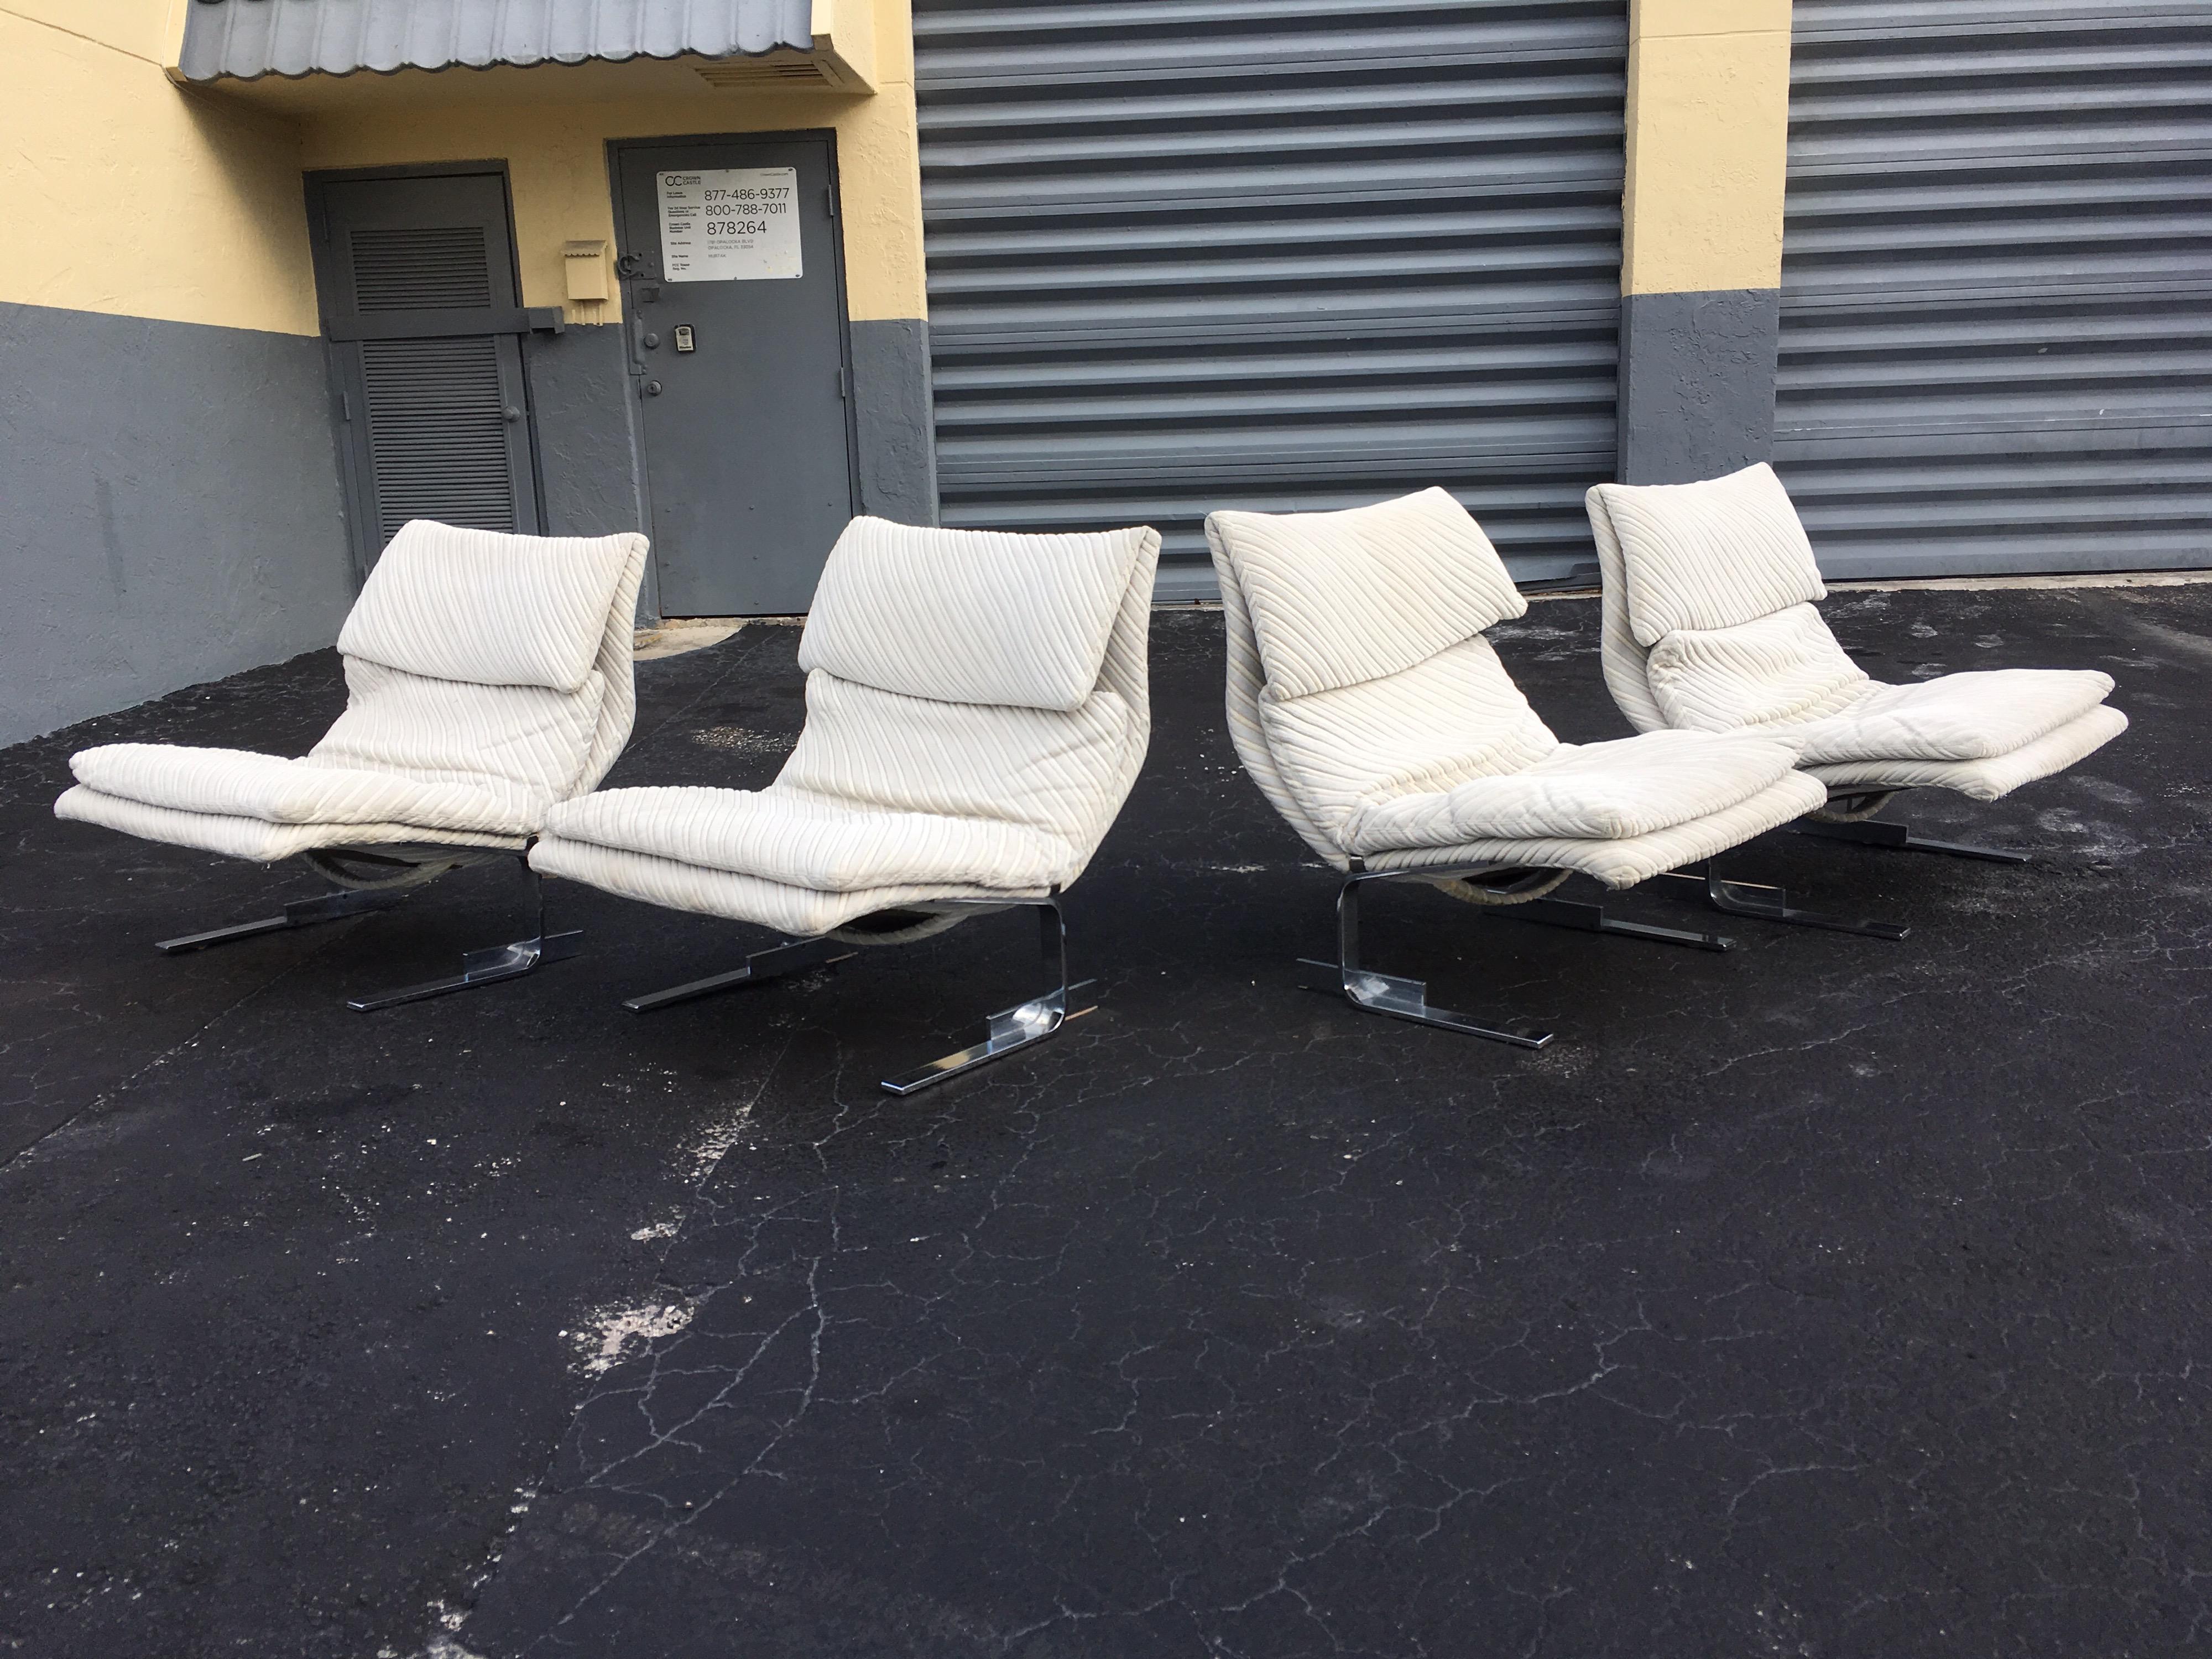 Pair of onda wave lounge chairs by Giovanni Offredi for Saporiti. Sold as a pair. Four chairs available.
Fabric has some light spots. We recommend to have the chairs recovered, we can help. Chrome has normal wear.